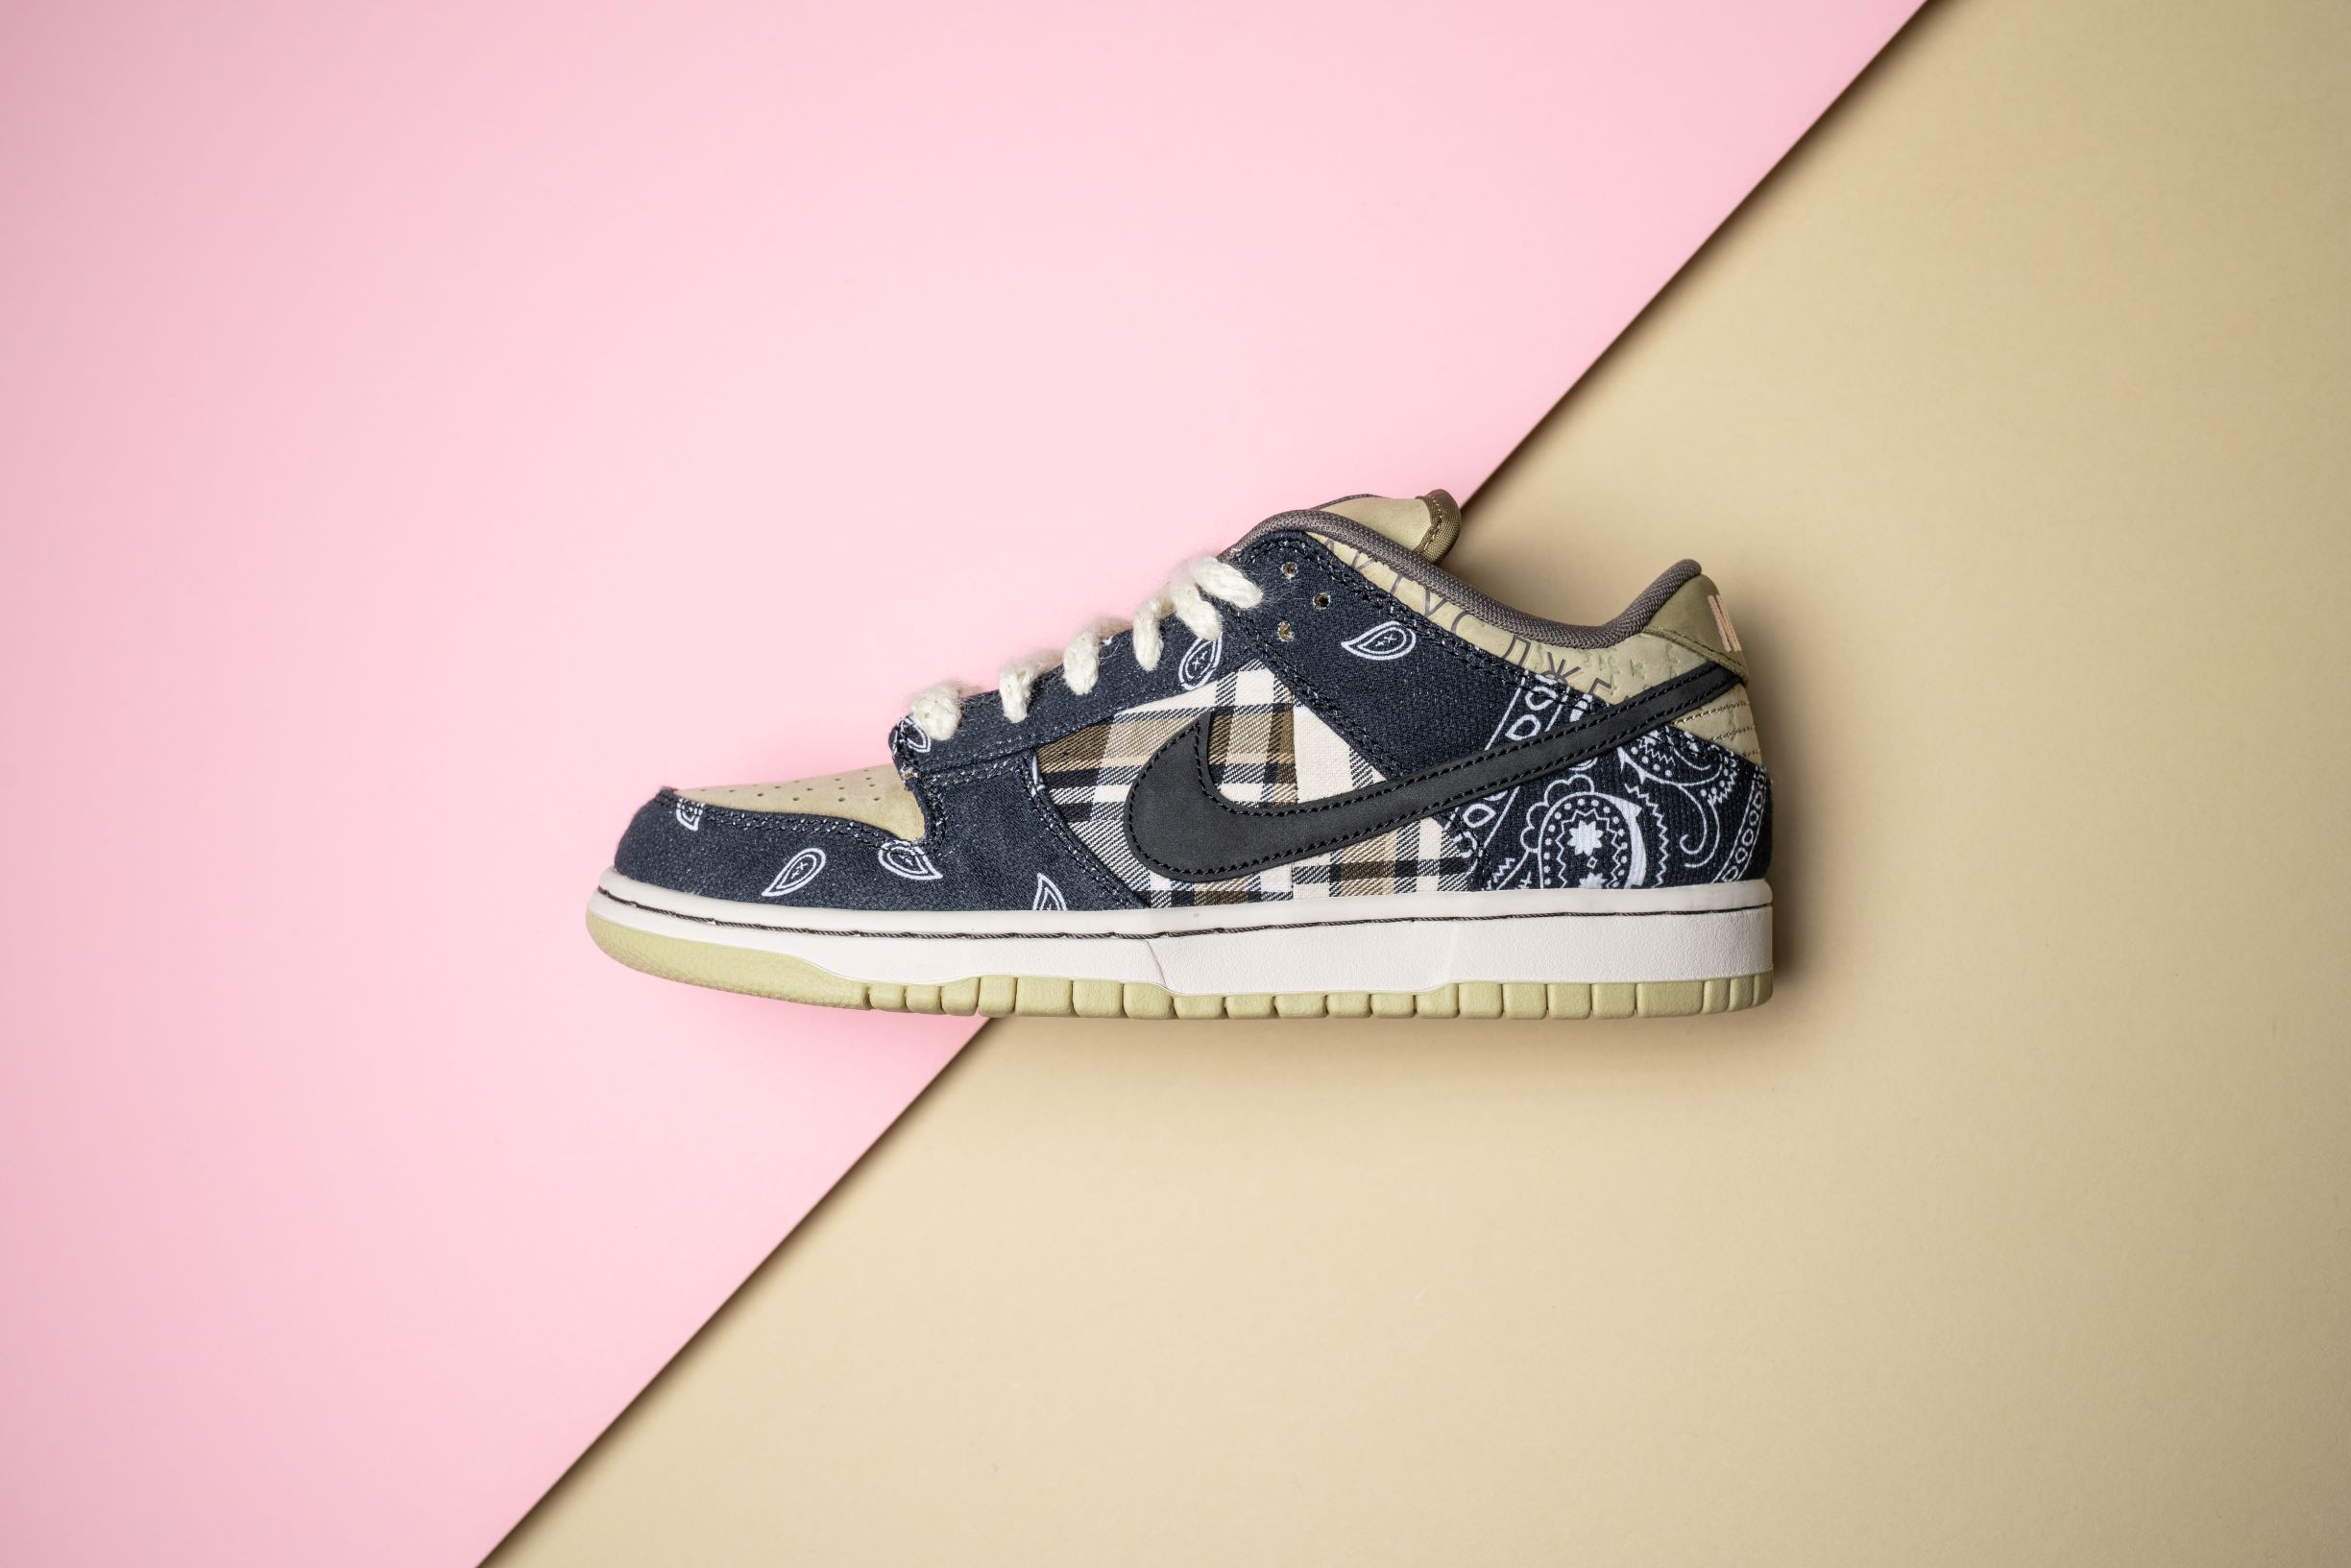 Nike Teams With Travis Scott For Bandanna-Print Dunk Low Sneakers